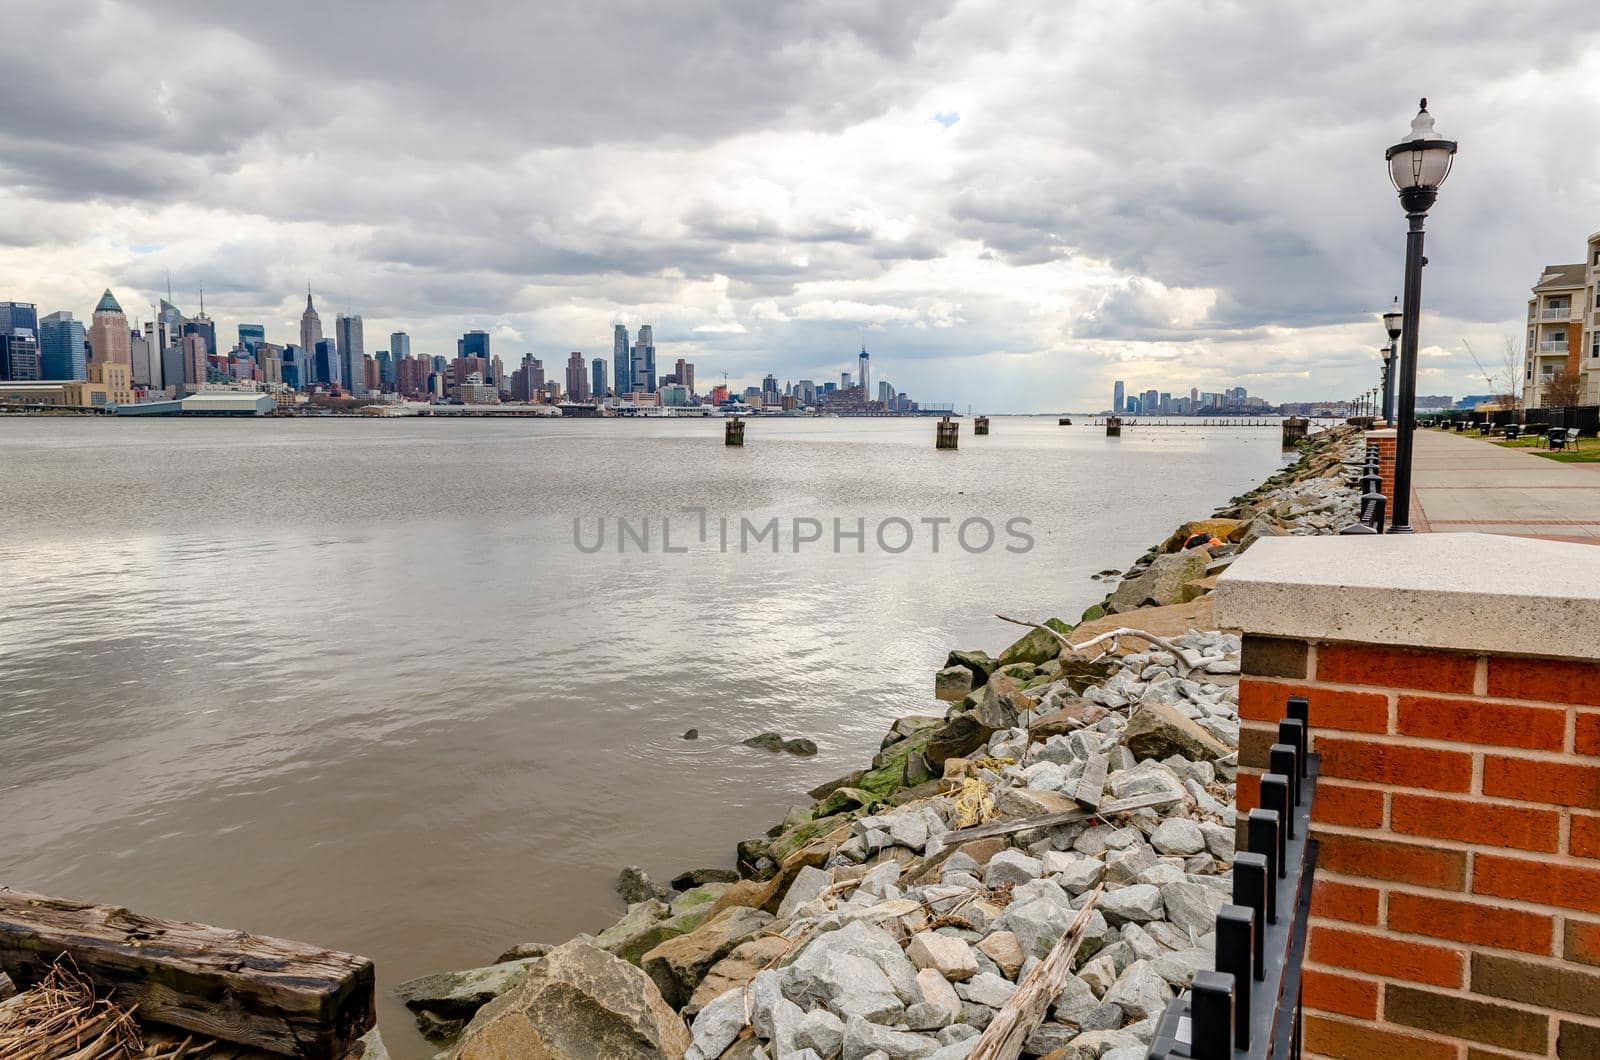 View of Manhattan from the Other side of Hudson River, New Jersey by bildgigant